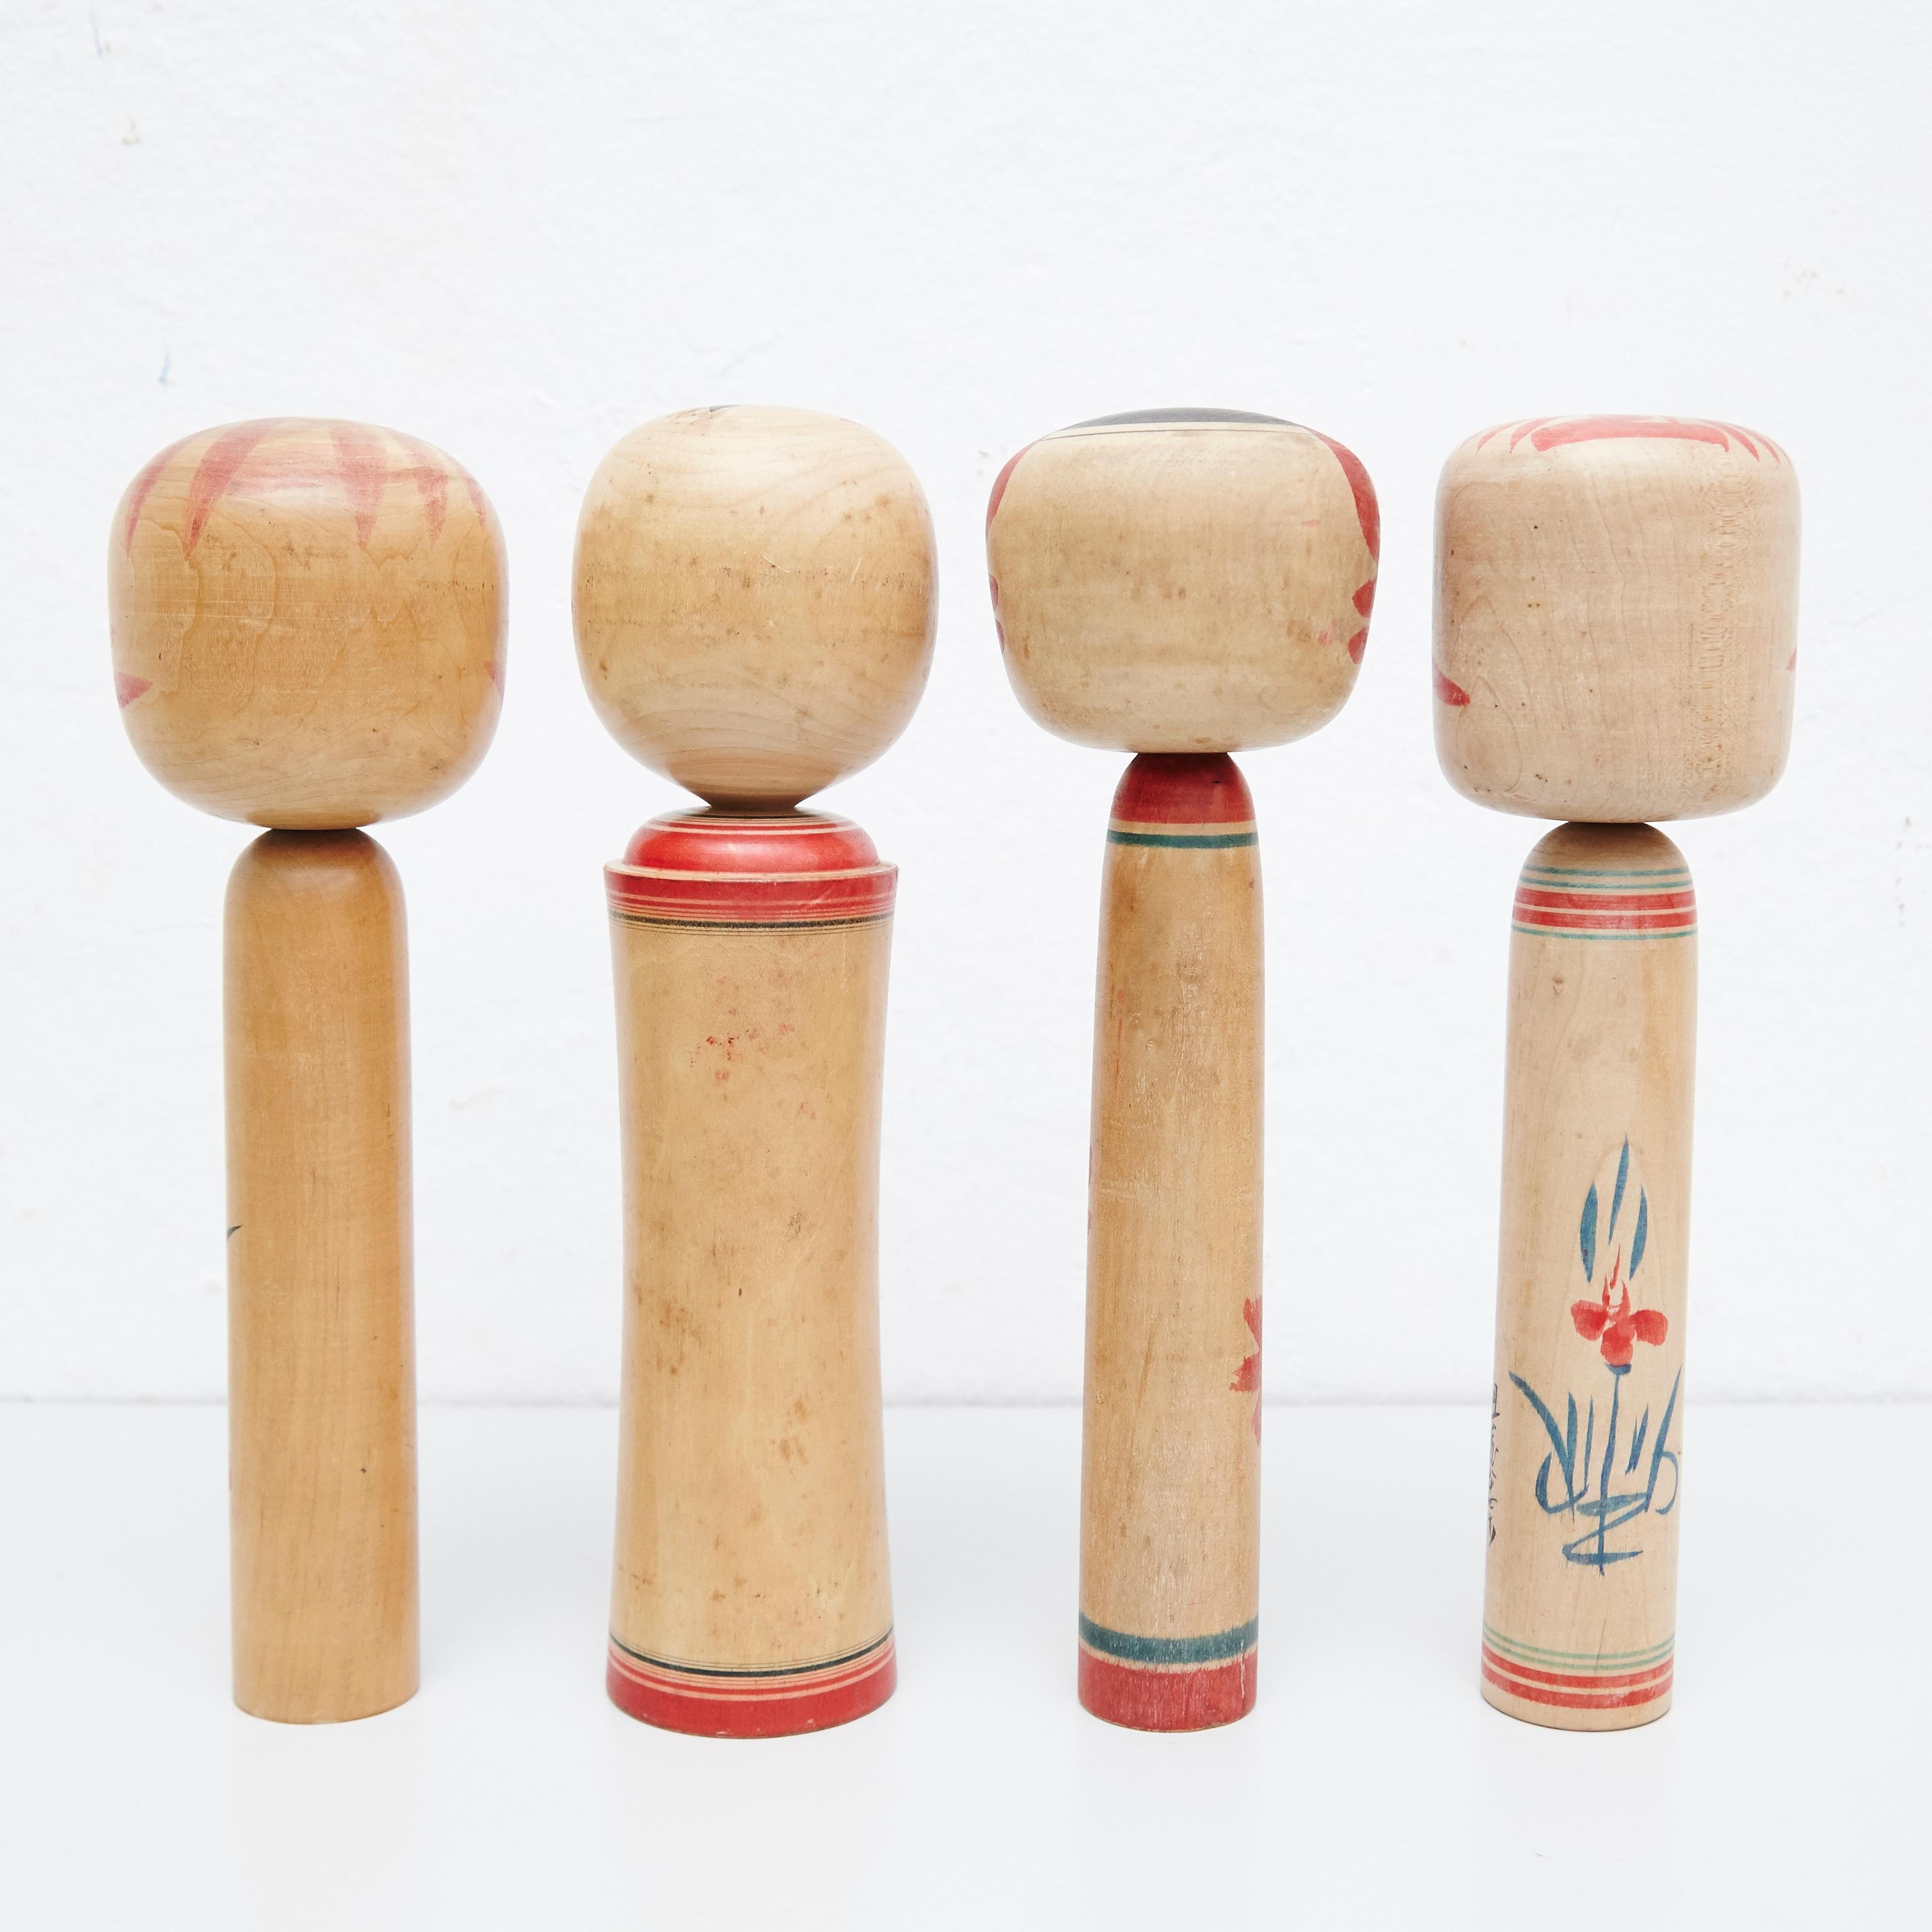 Japanese dolls called Kokeshi of the early 20th century.
Provenance from the northern Japan.
Set of 4.

Measures: 

30 x 9.5 cm
30.5 x 8.5 cm
30.5 x 9.5 cm
30.5 x 8.5 cm

Handmade by Japanese artisants from wood. Have a simple trunk as a